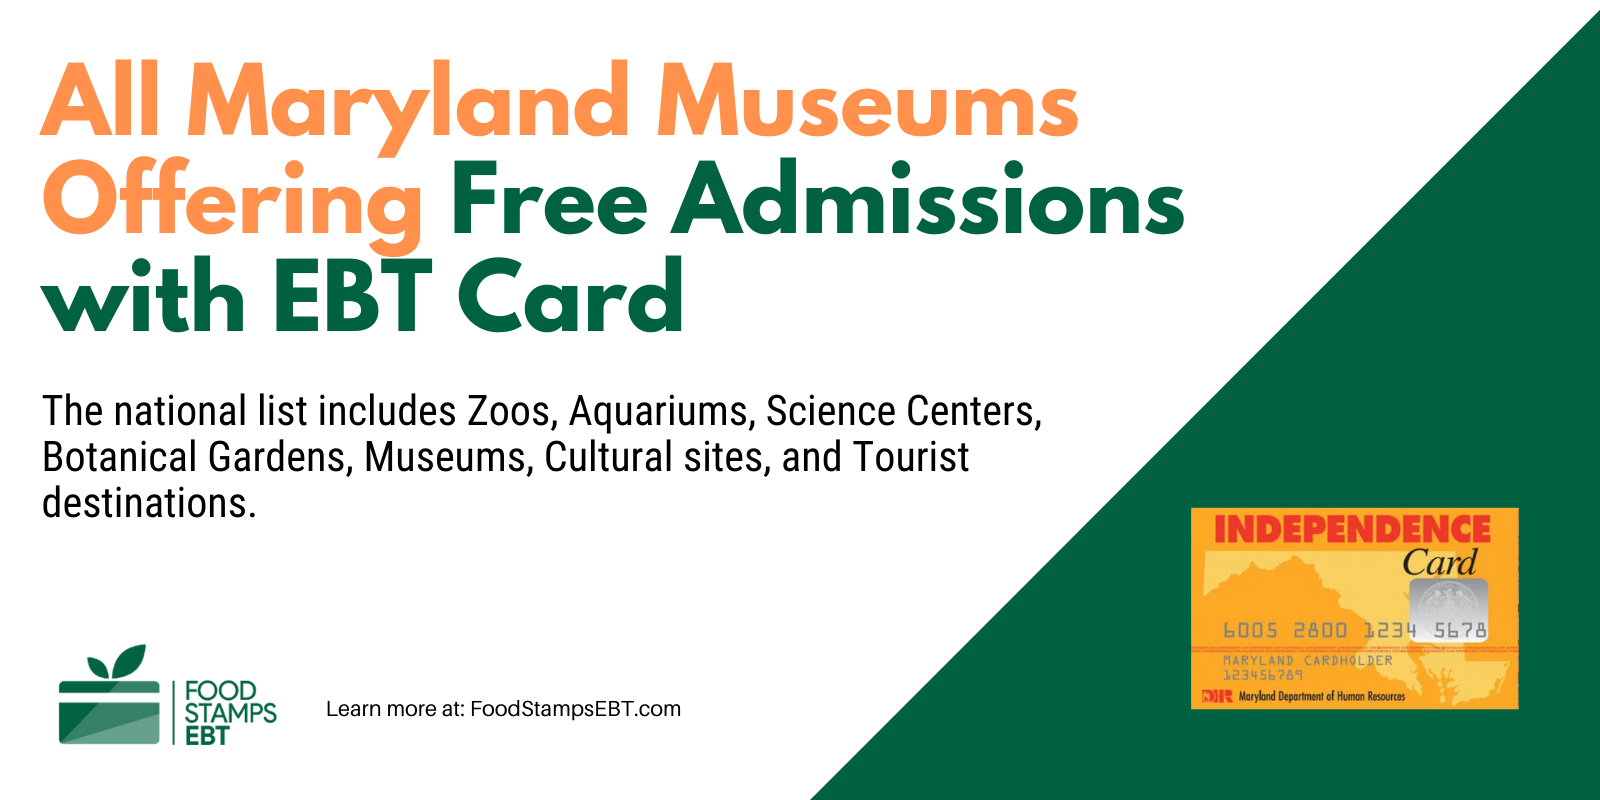 Maryland Museums For Free with EBT Card